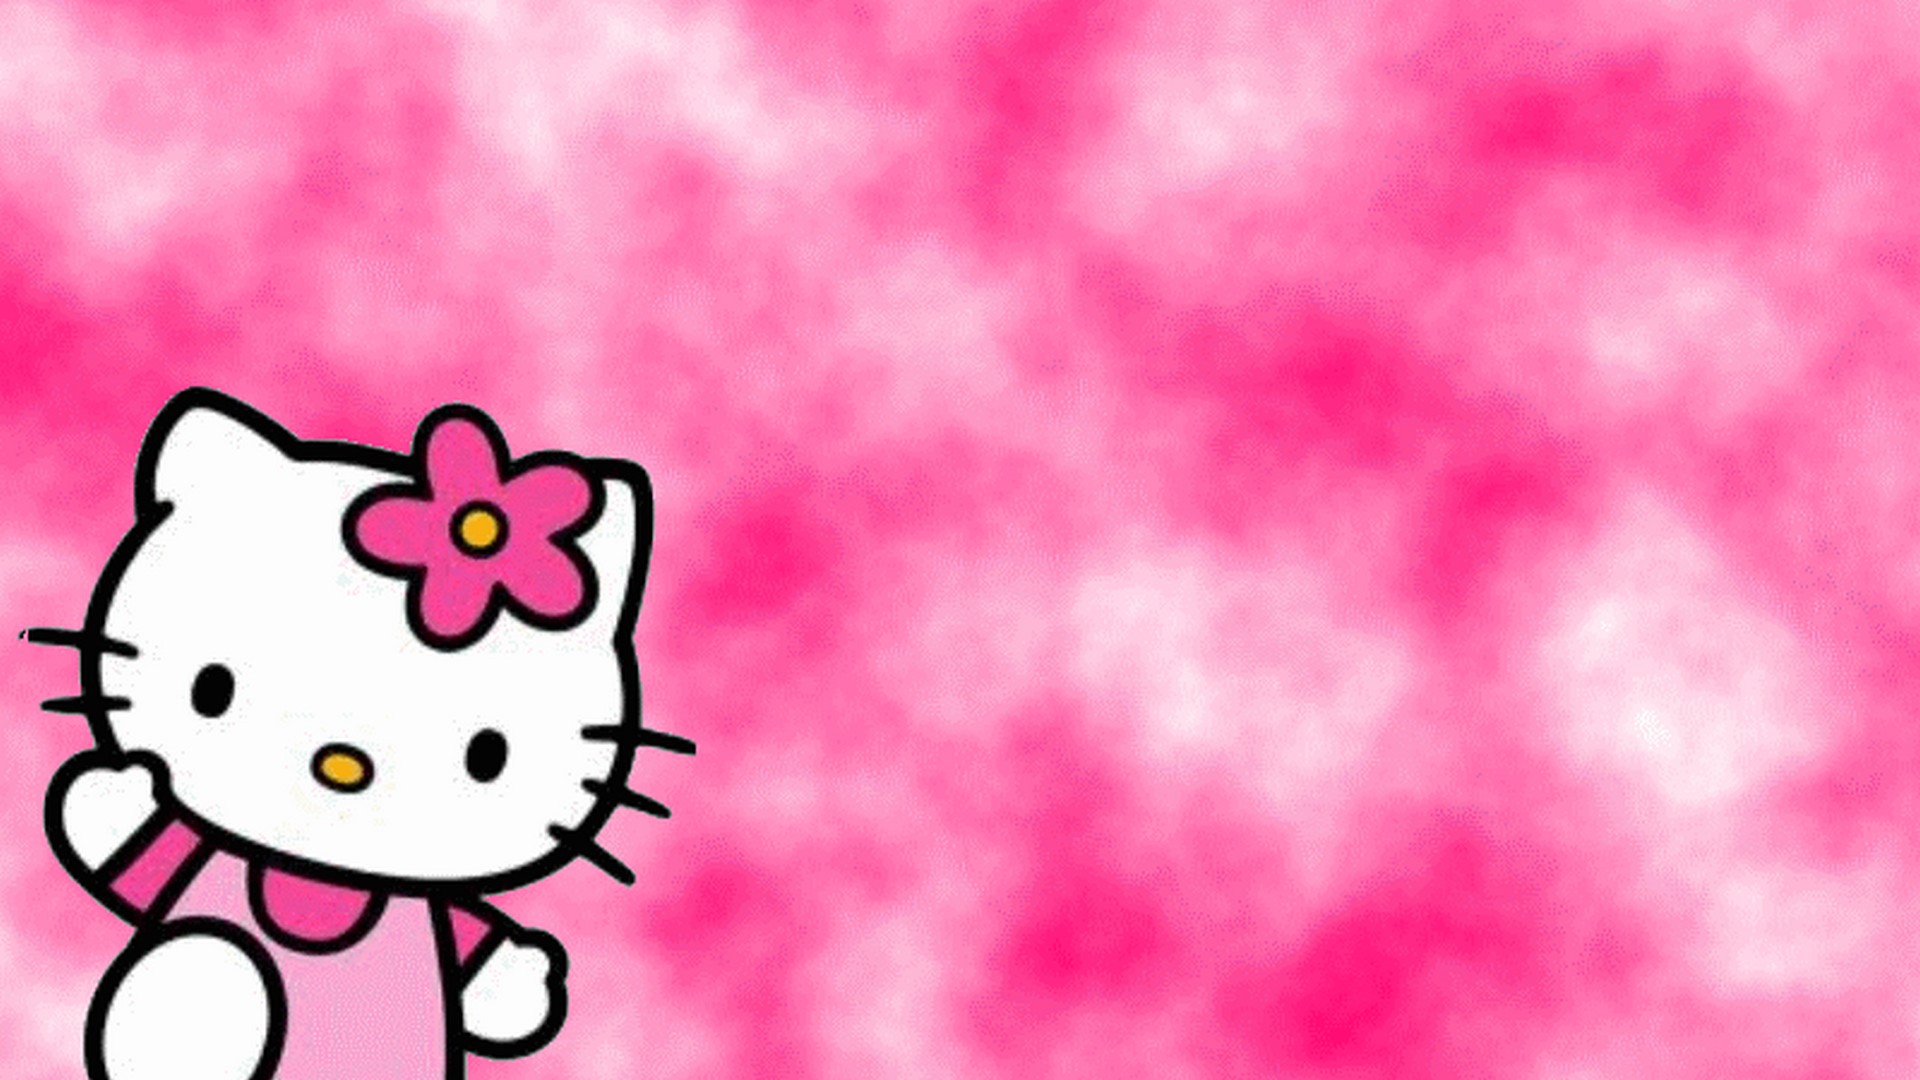 Desktop Wallpaper Kitty with image resolution 1920x1080 pixel. You can use this wallpaper as background for your desktop Computer Screensavers, Android or iPhone smartphones